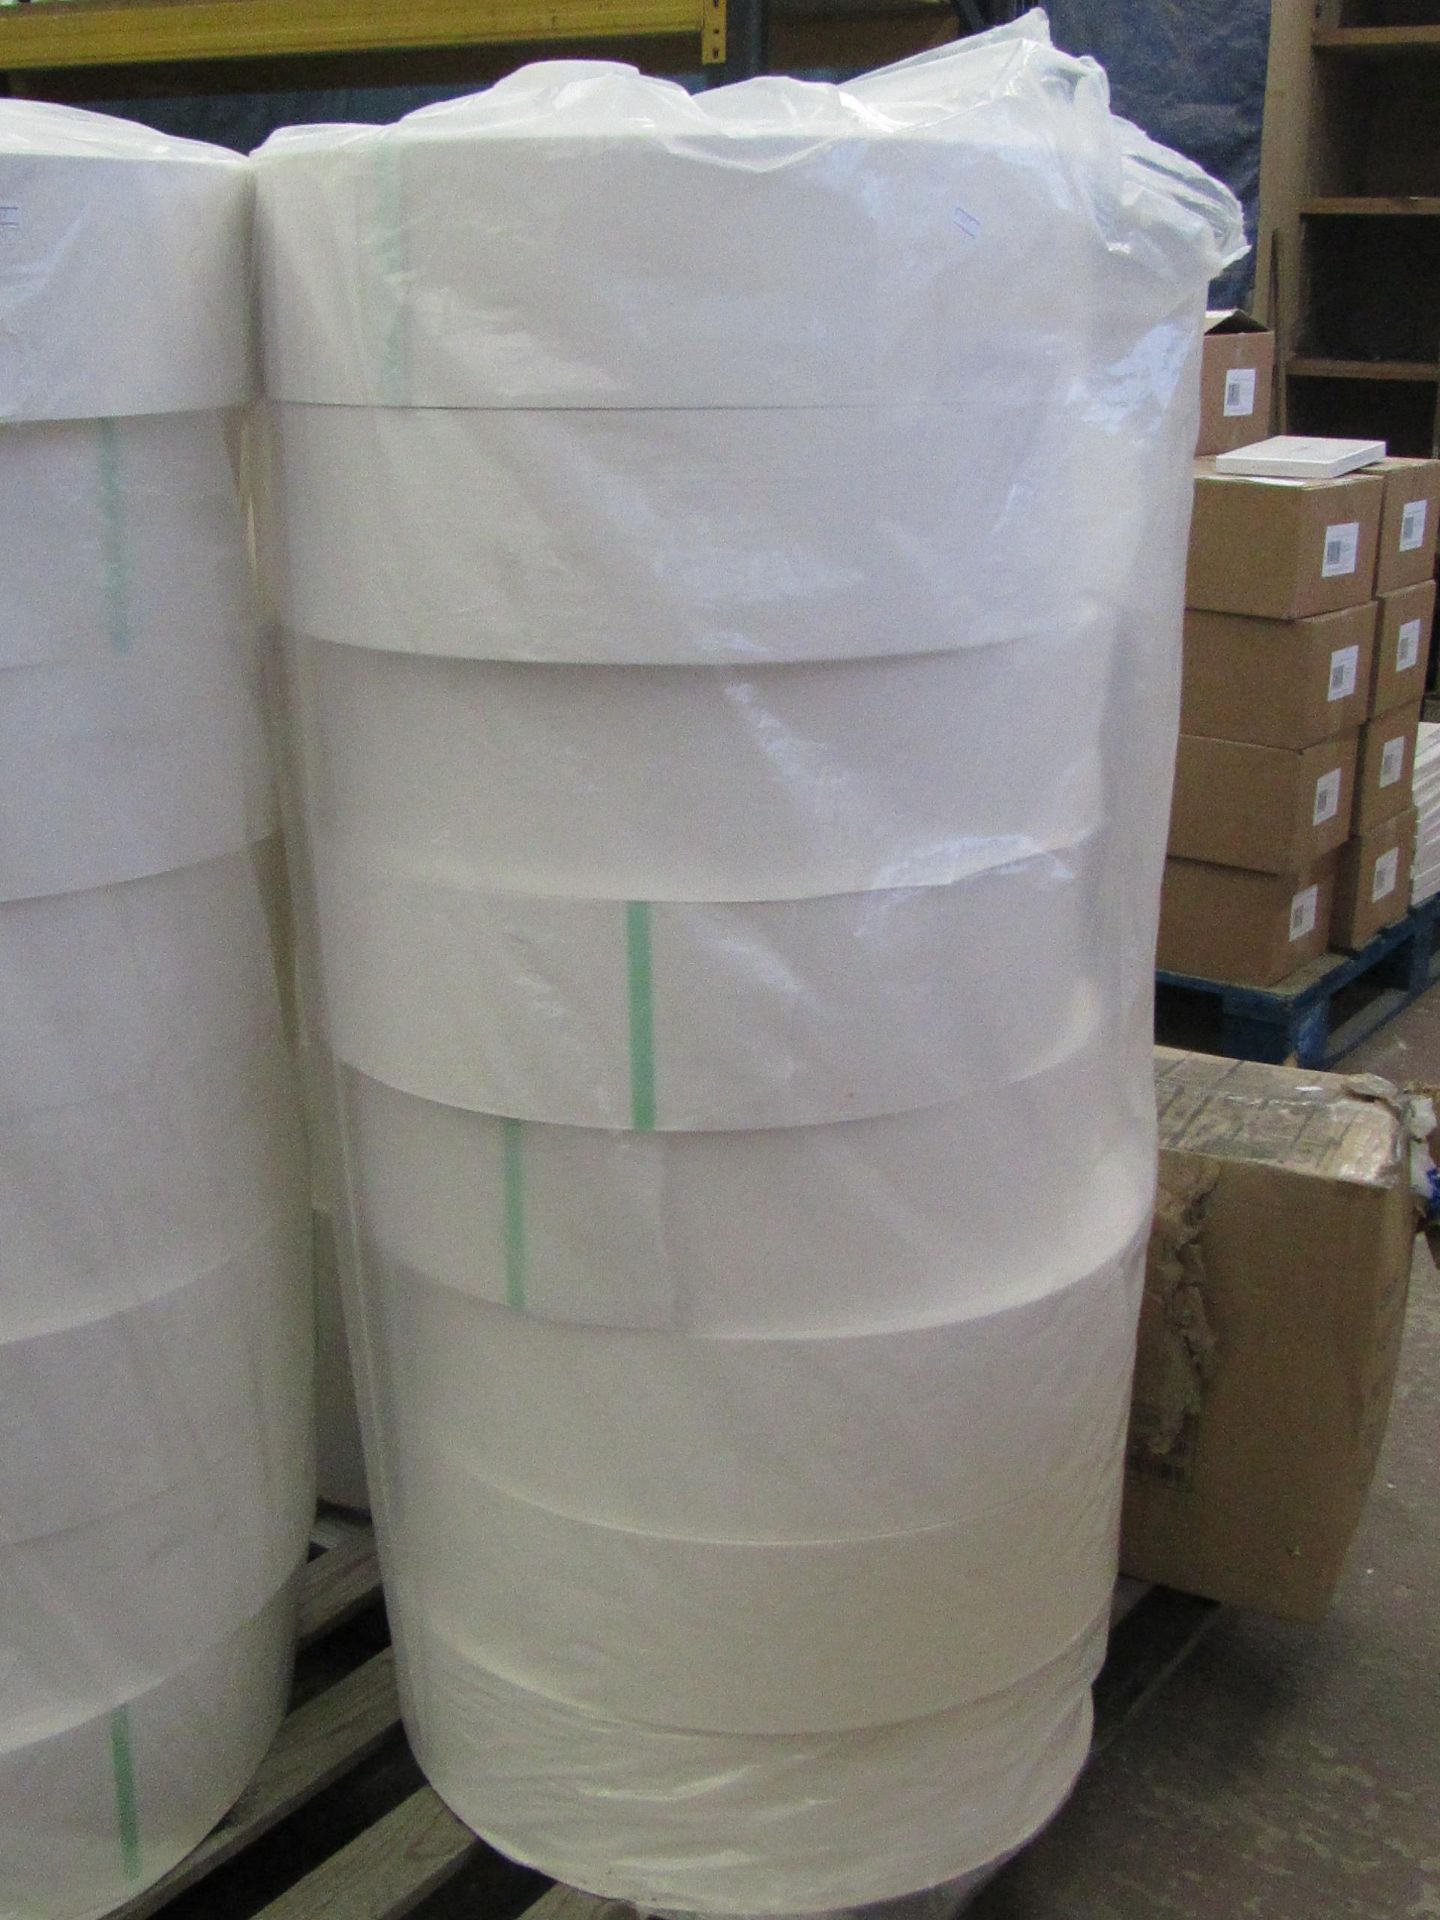 8x Extra large rolls of tissue paper. All new in packaging.